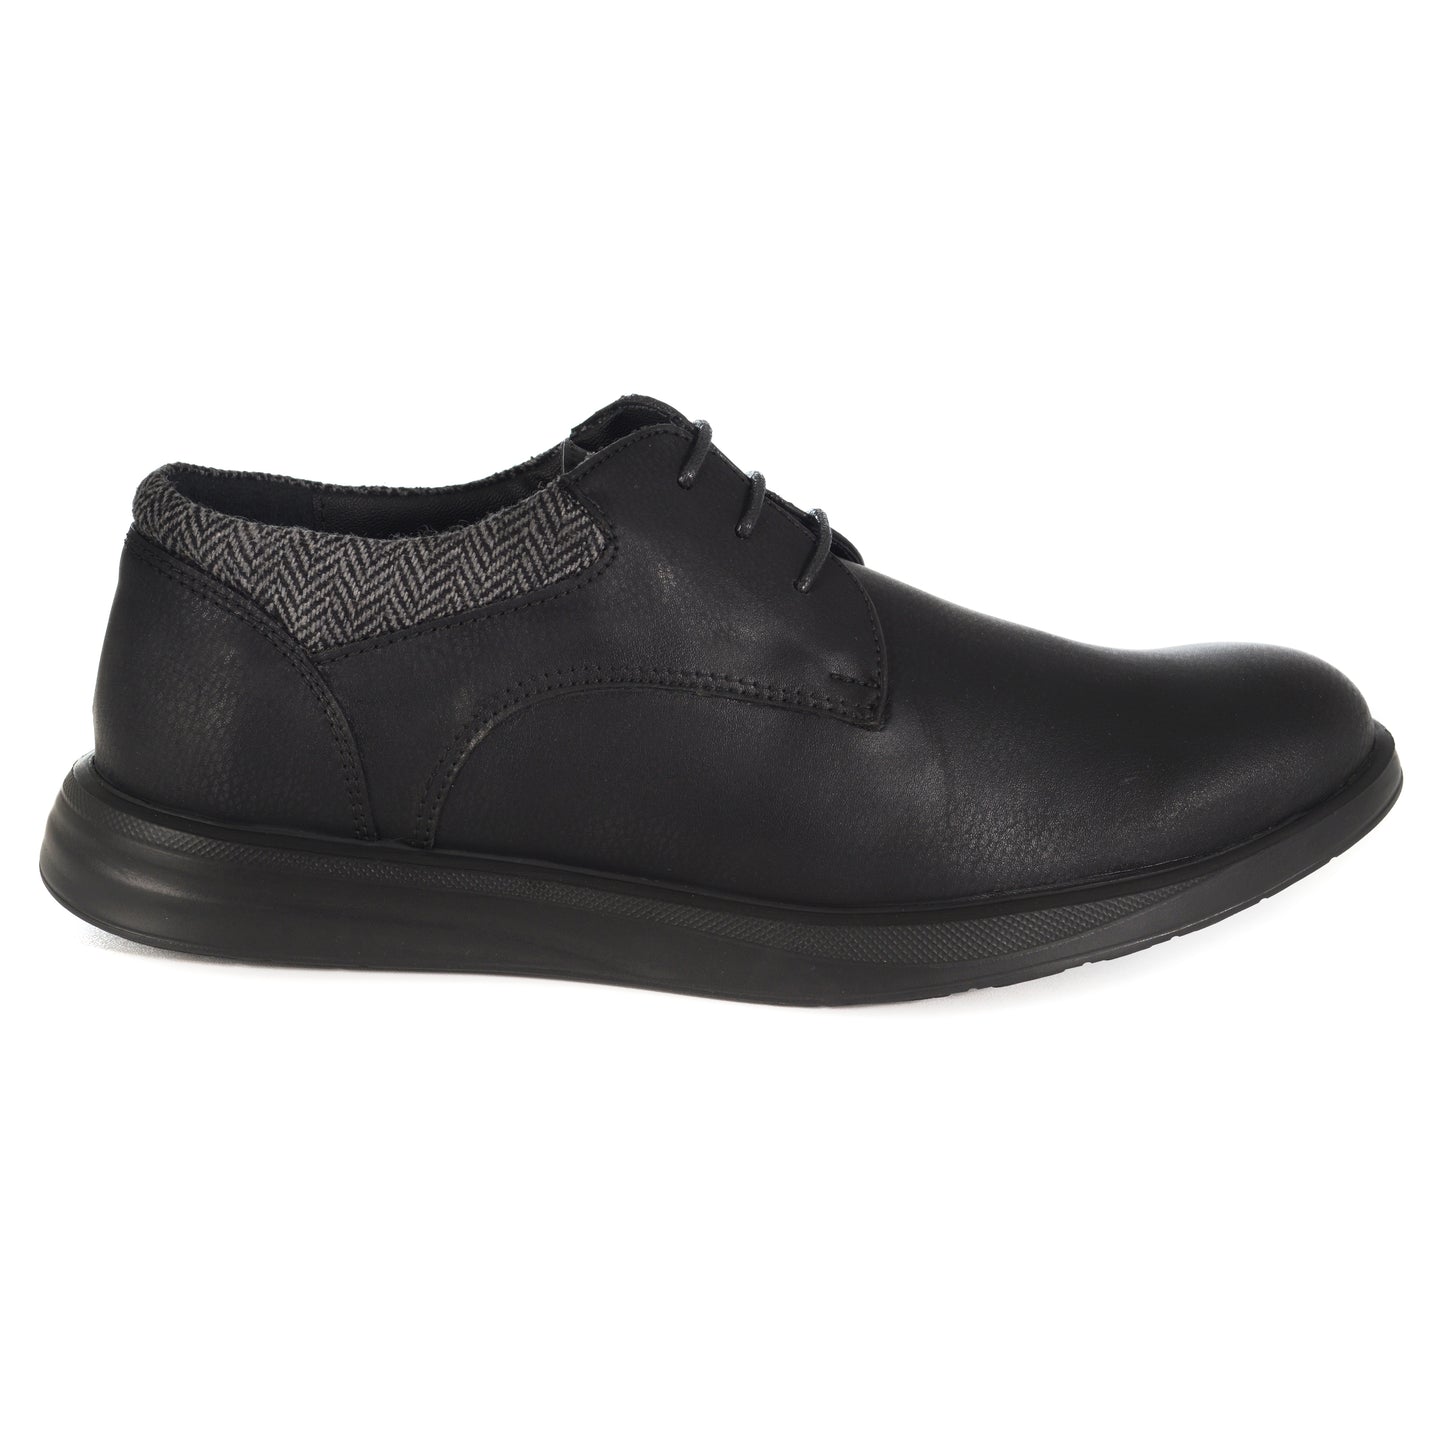 2H 9000 Full Black Chamois Texture Casual Shoes